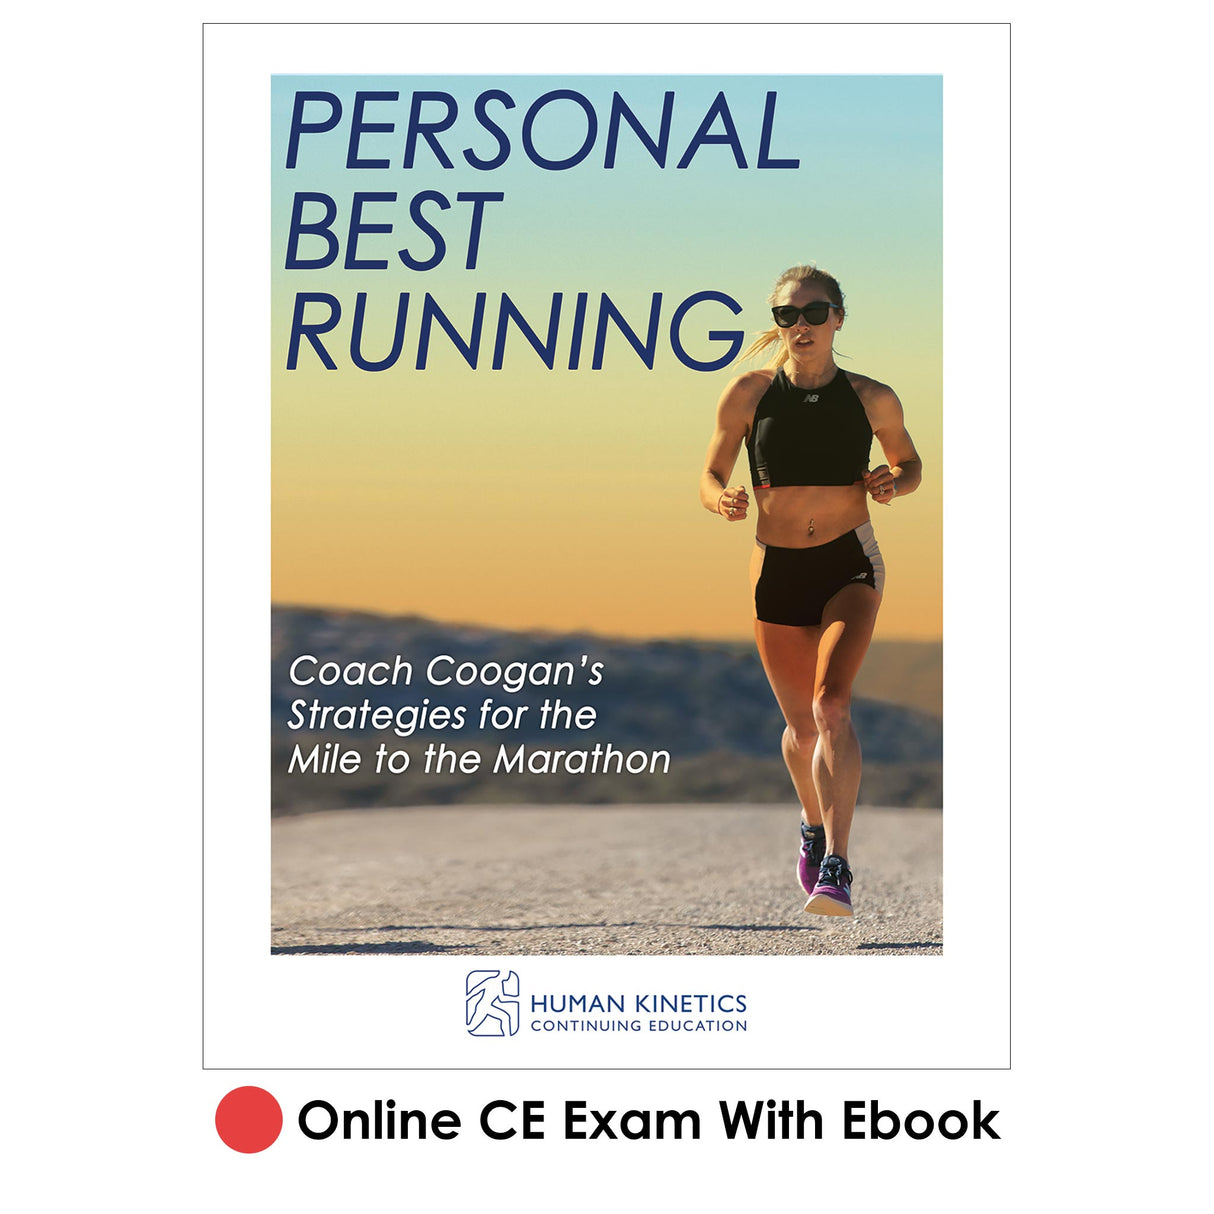 Personal Best Running Online CE Exam With Ebook